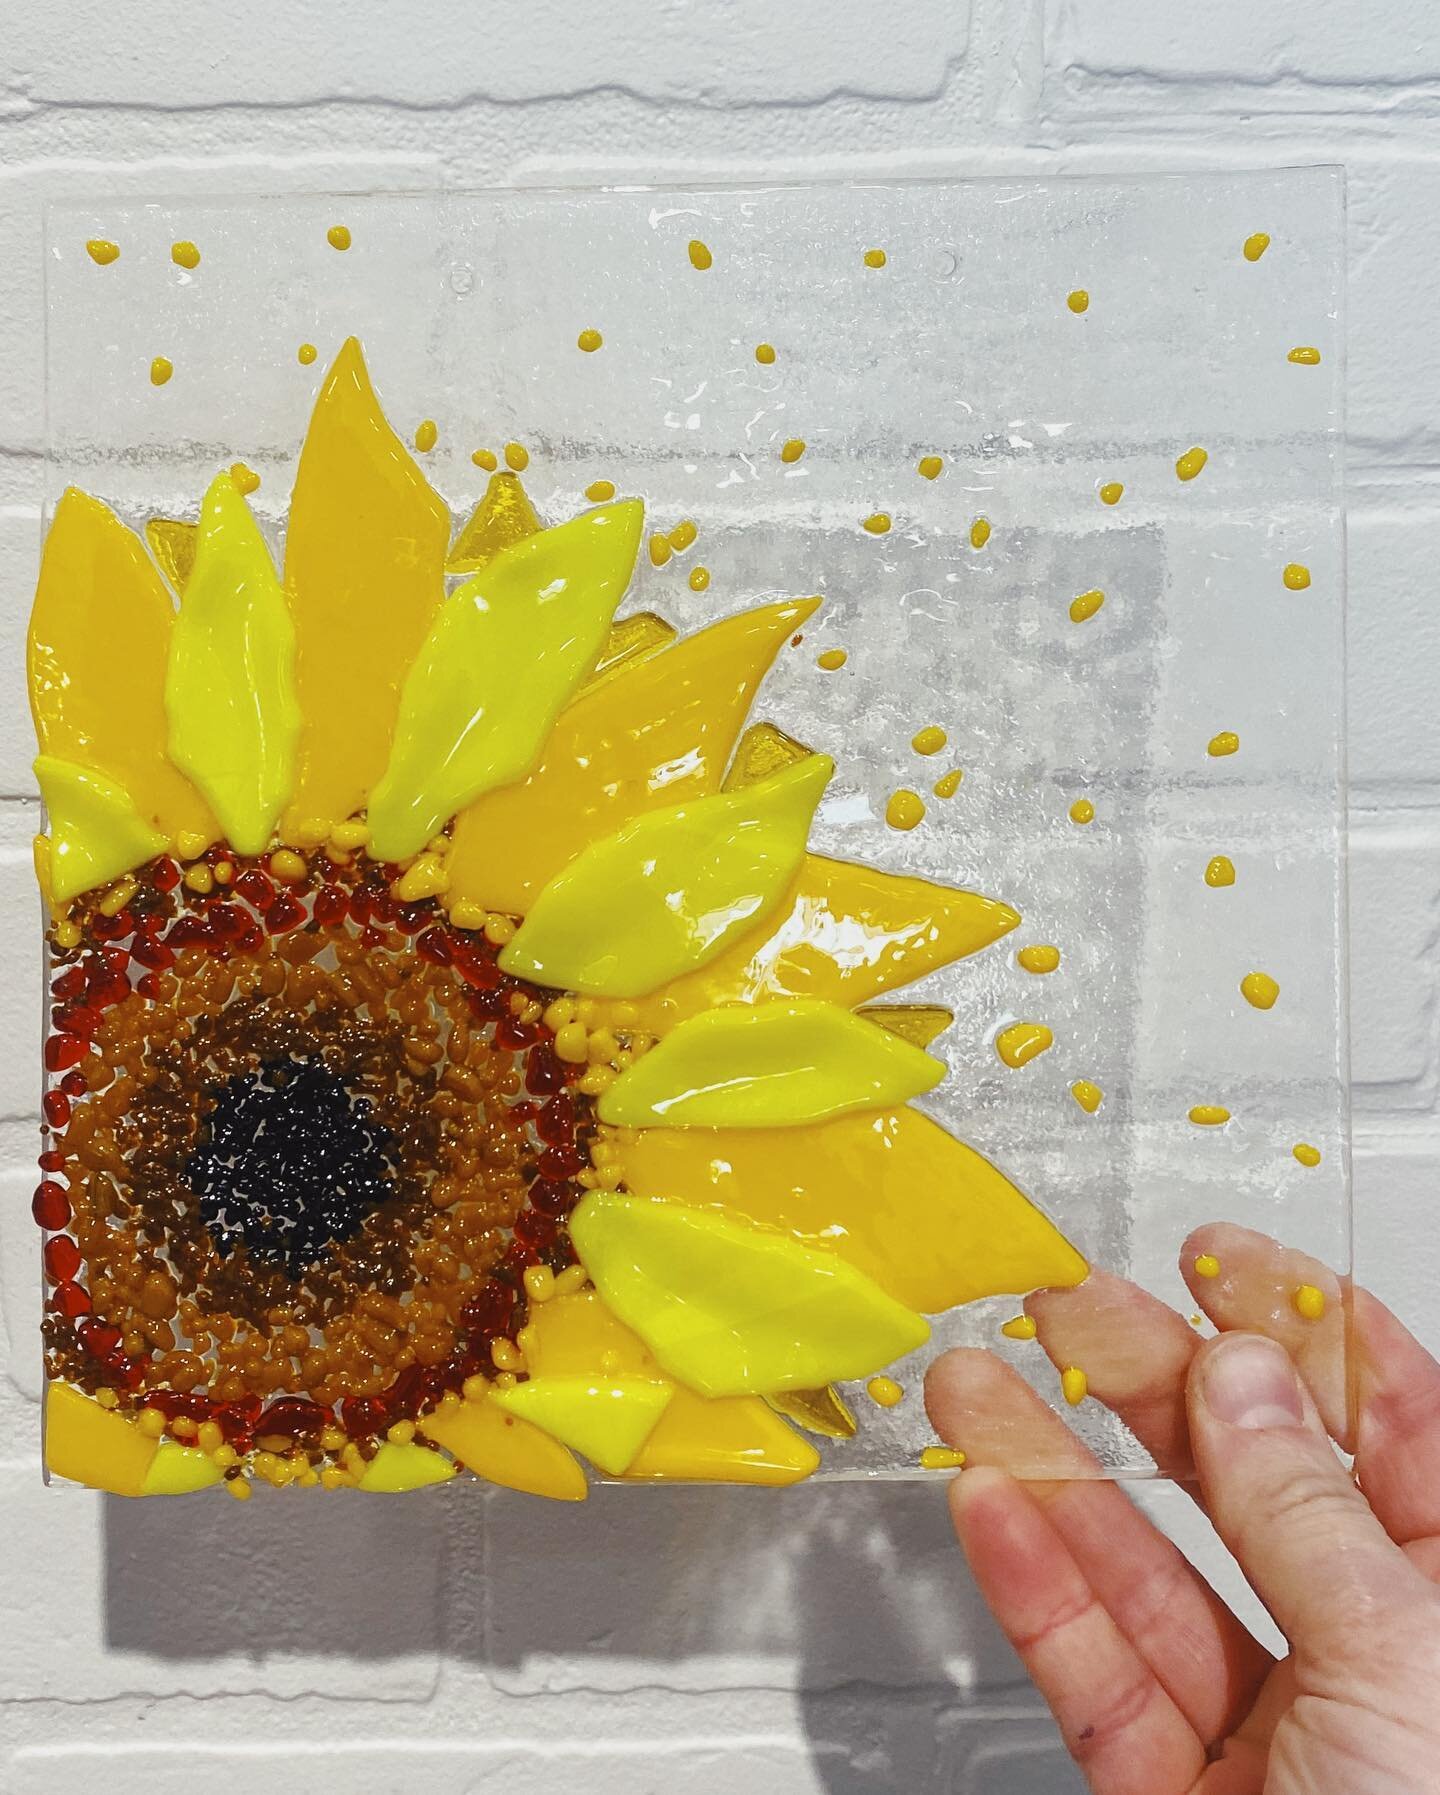 Sunflowers for Ukraine fundraiser at Spring Street Studios! Sunflowers are a Ukrainian symbol of peace. All proceeds from sunflower suncatchers will be matched by a local foundation and donated to the Red Cross Ukrainian Relief Fund. &hellip;#sunflow